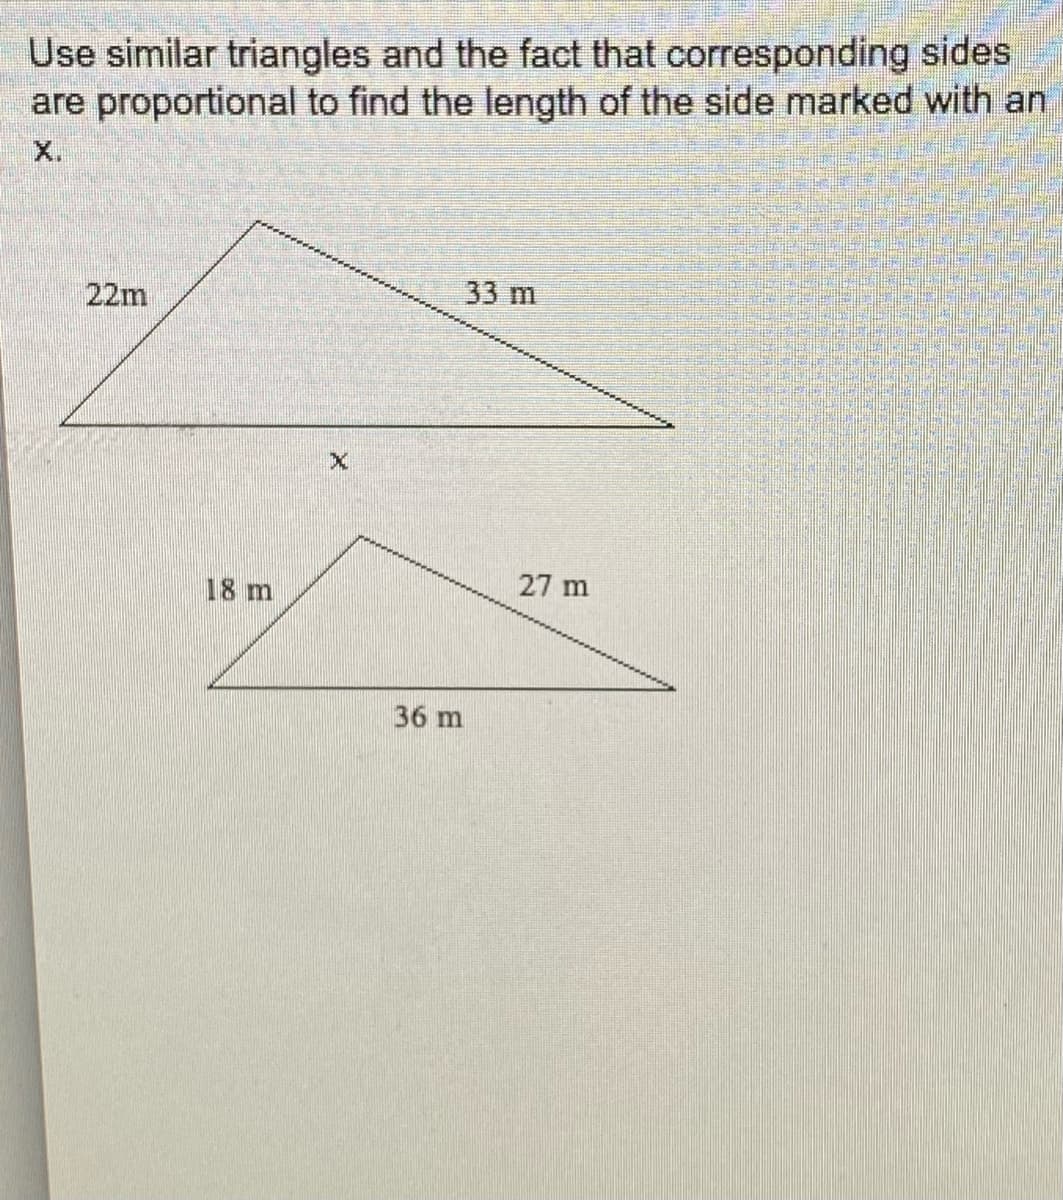 Use similar triangles and the fact that corresponding sides
are proportional to find the length of the side marked with an
X.
22m
33 m
27 m
18 m
36 m
